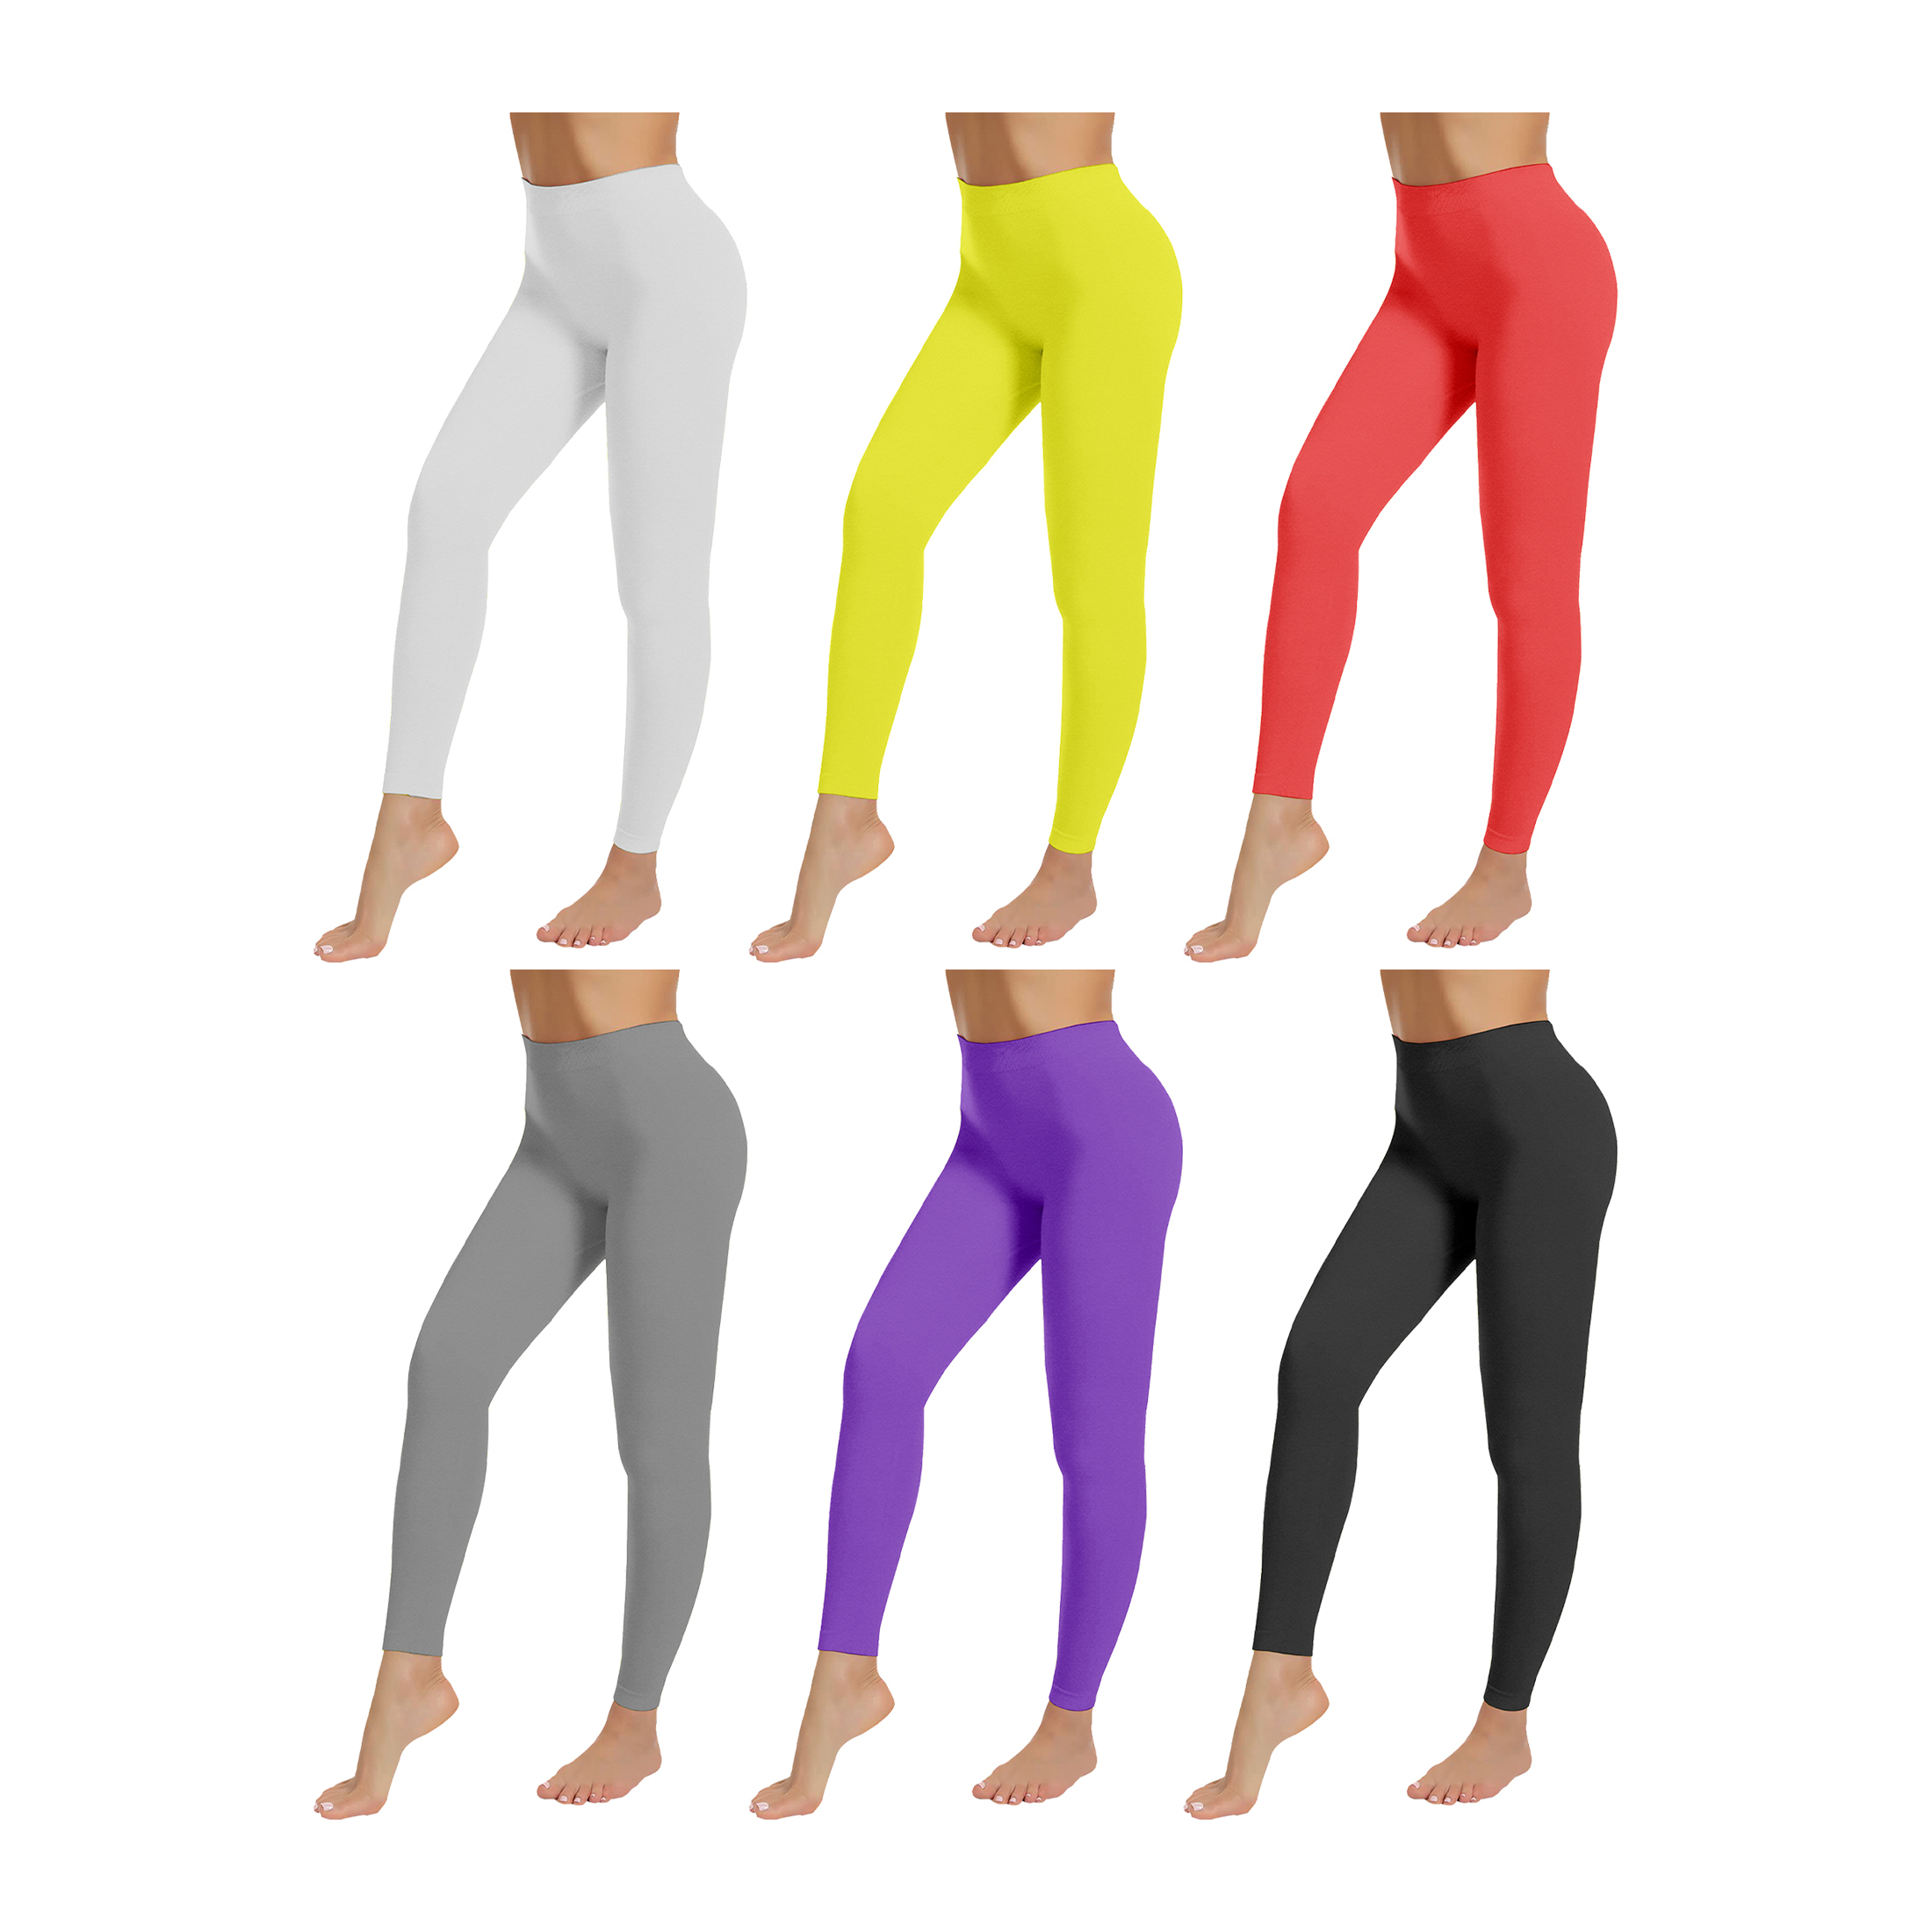 3-Pack: Women's High-Waist Ultra-Soft Solid Fitness Stretchy Yoga Leggings Pants - XS